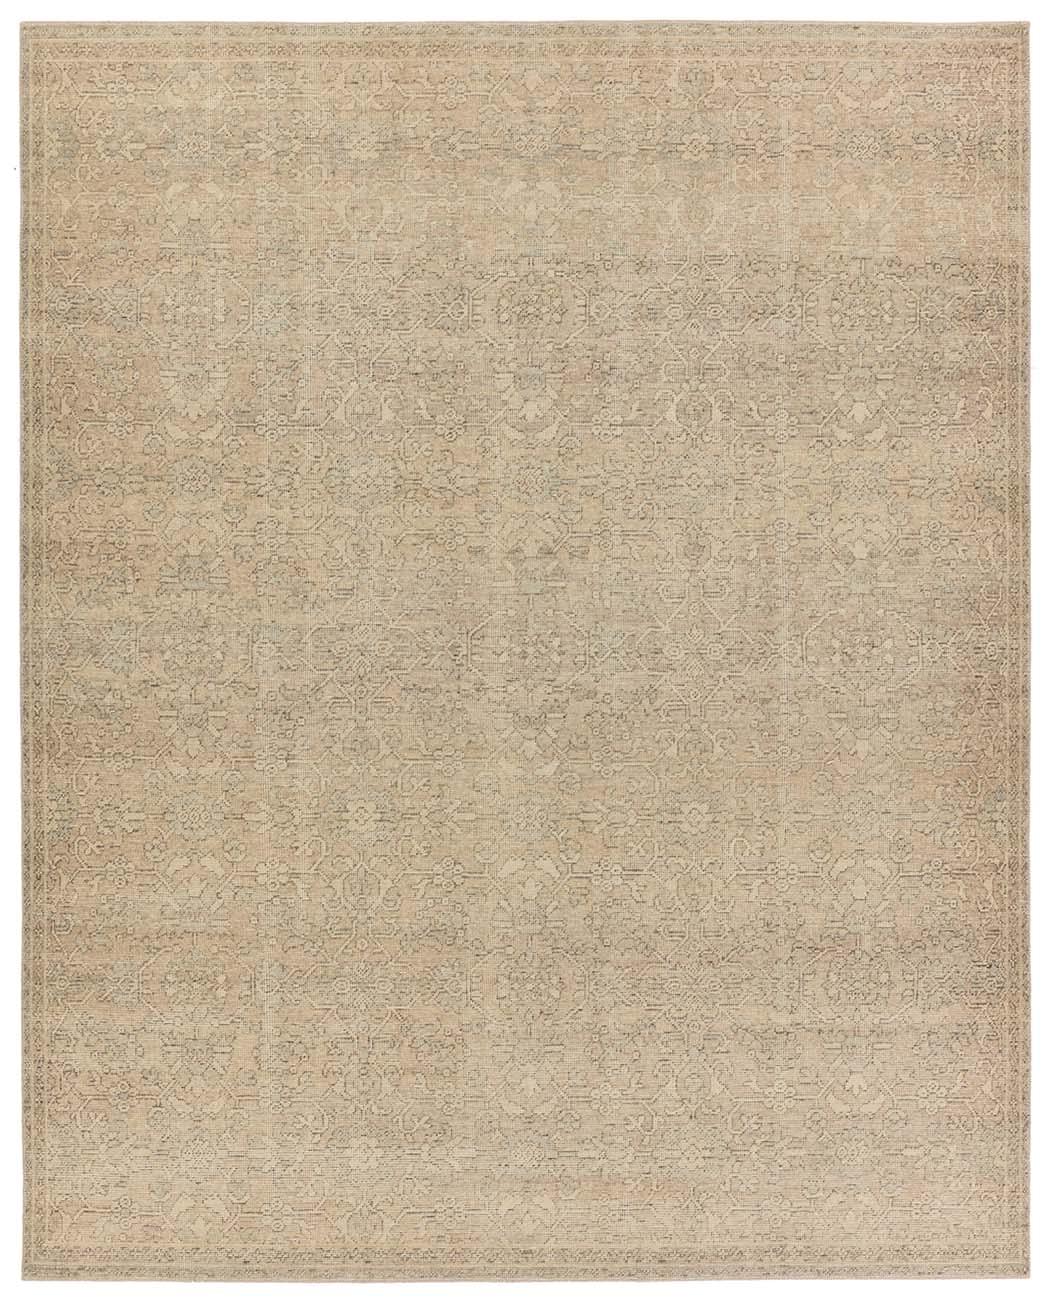 Jaipur Living Earl Hand-Knotted Floral Tan/ Gray Area Rug  Product Image